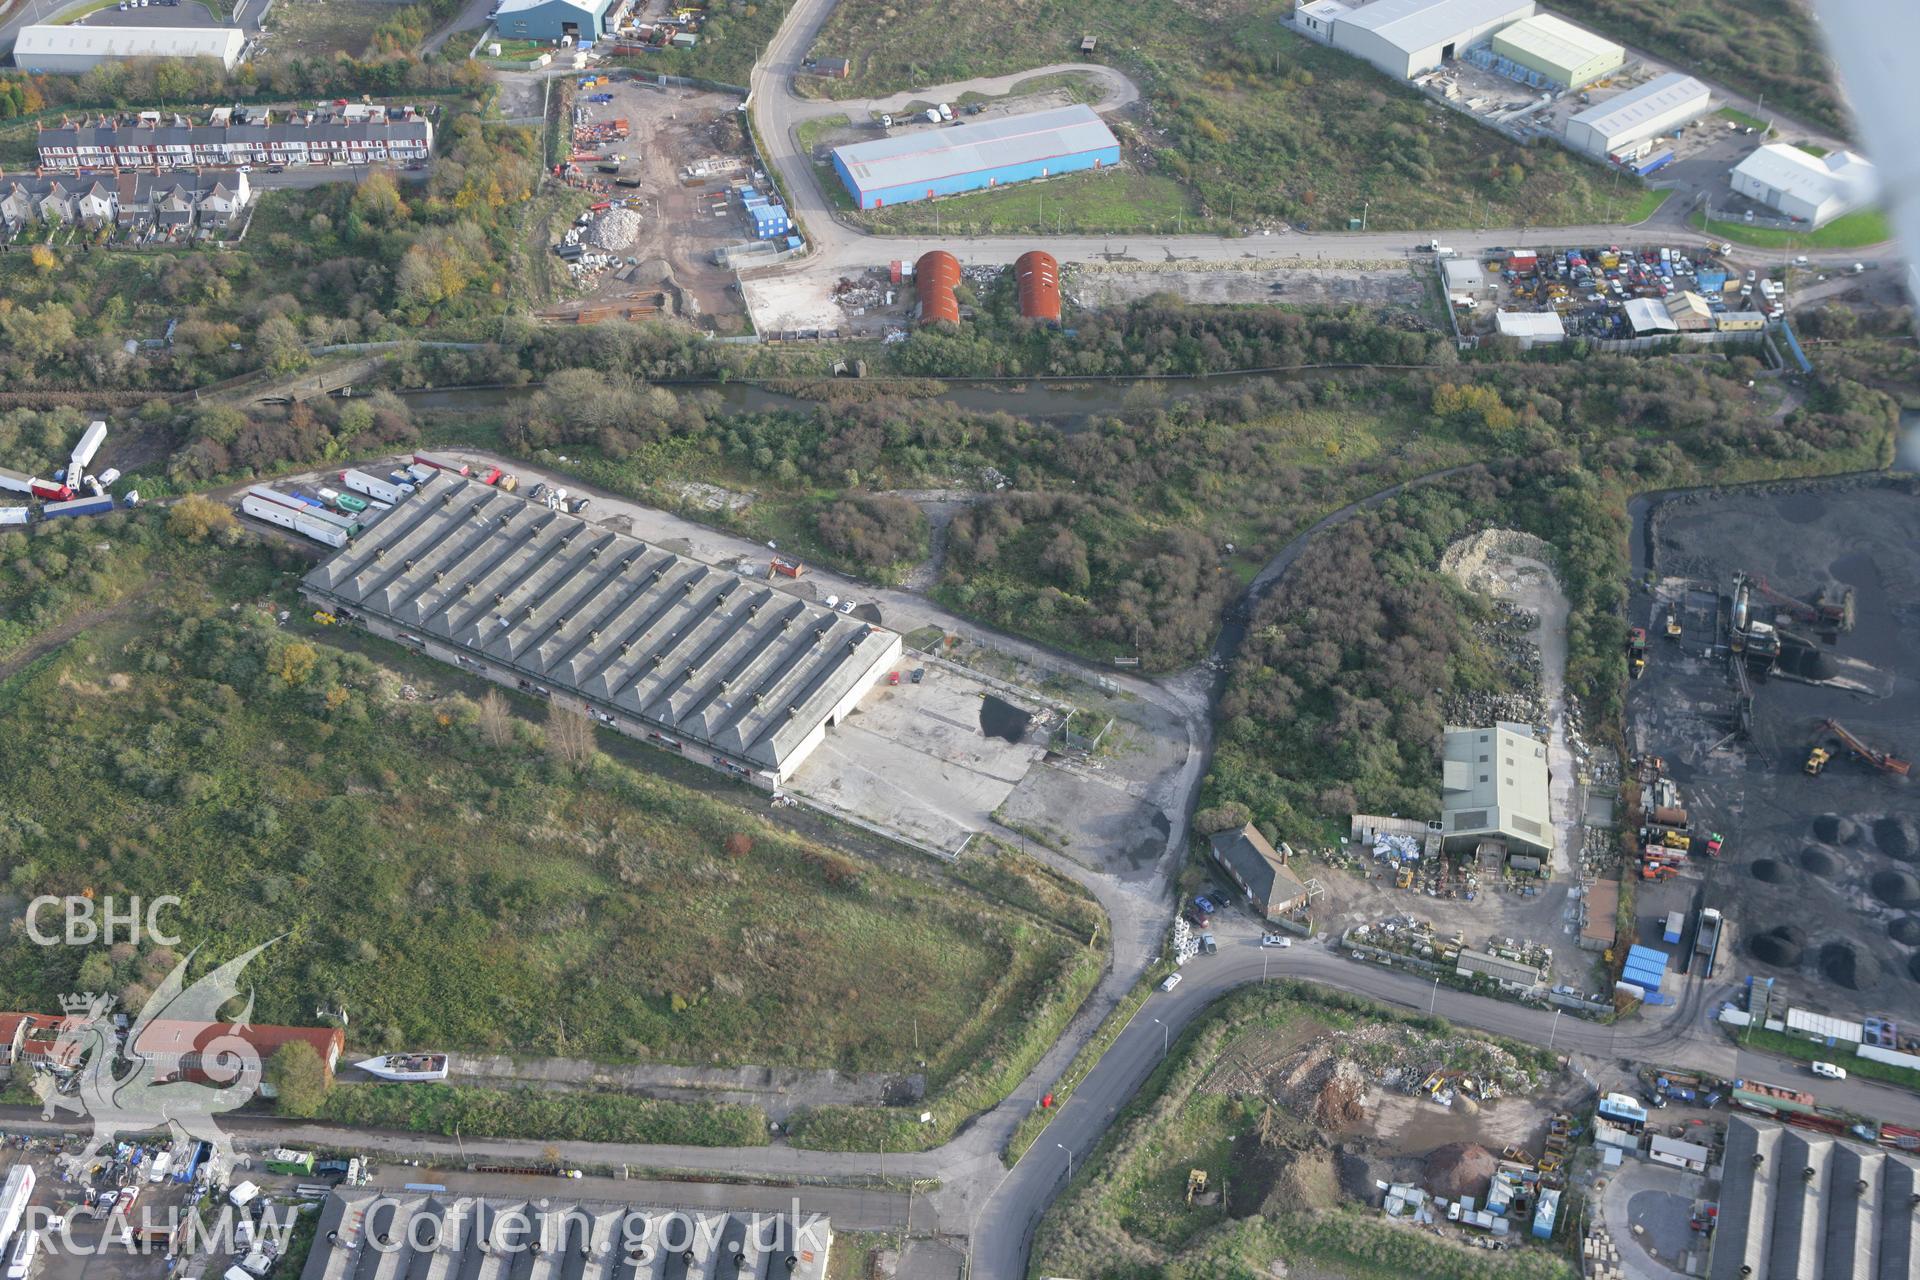 RCAHMW colour oblique photograph of Atlantic Trading Estate Round Barrow. Taken by Toby Driver on 12/11/2008.